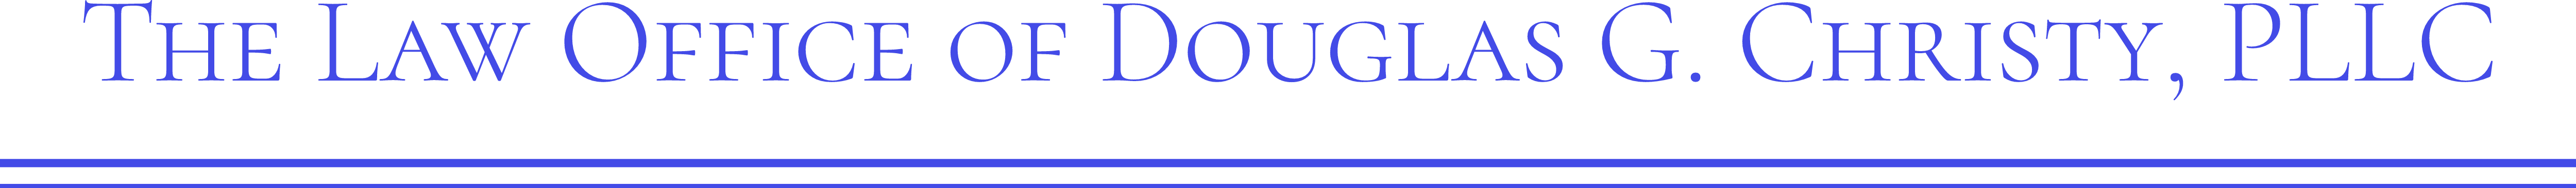 The Law Office of Douglas G. Christy, PLLC Logo